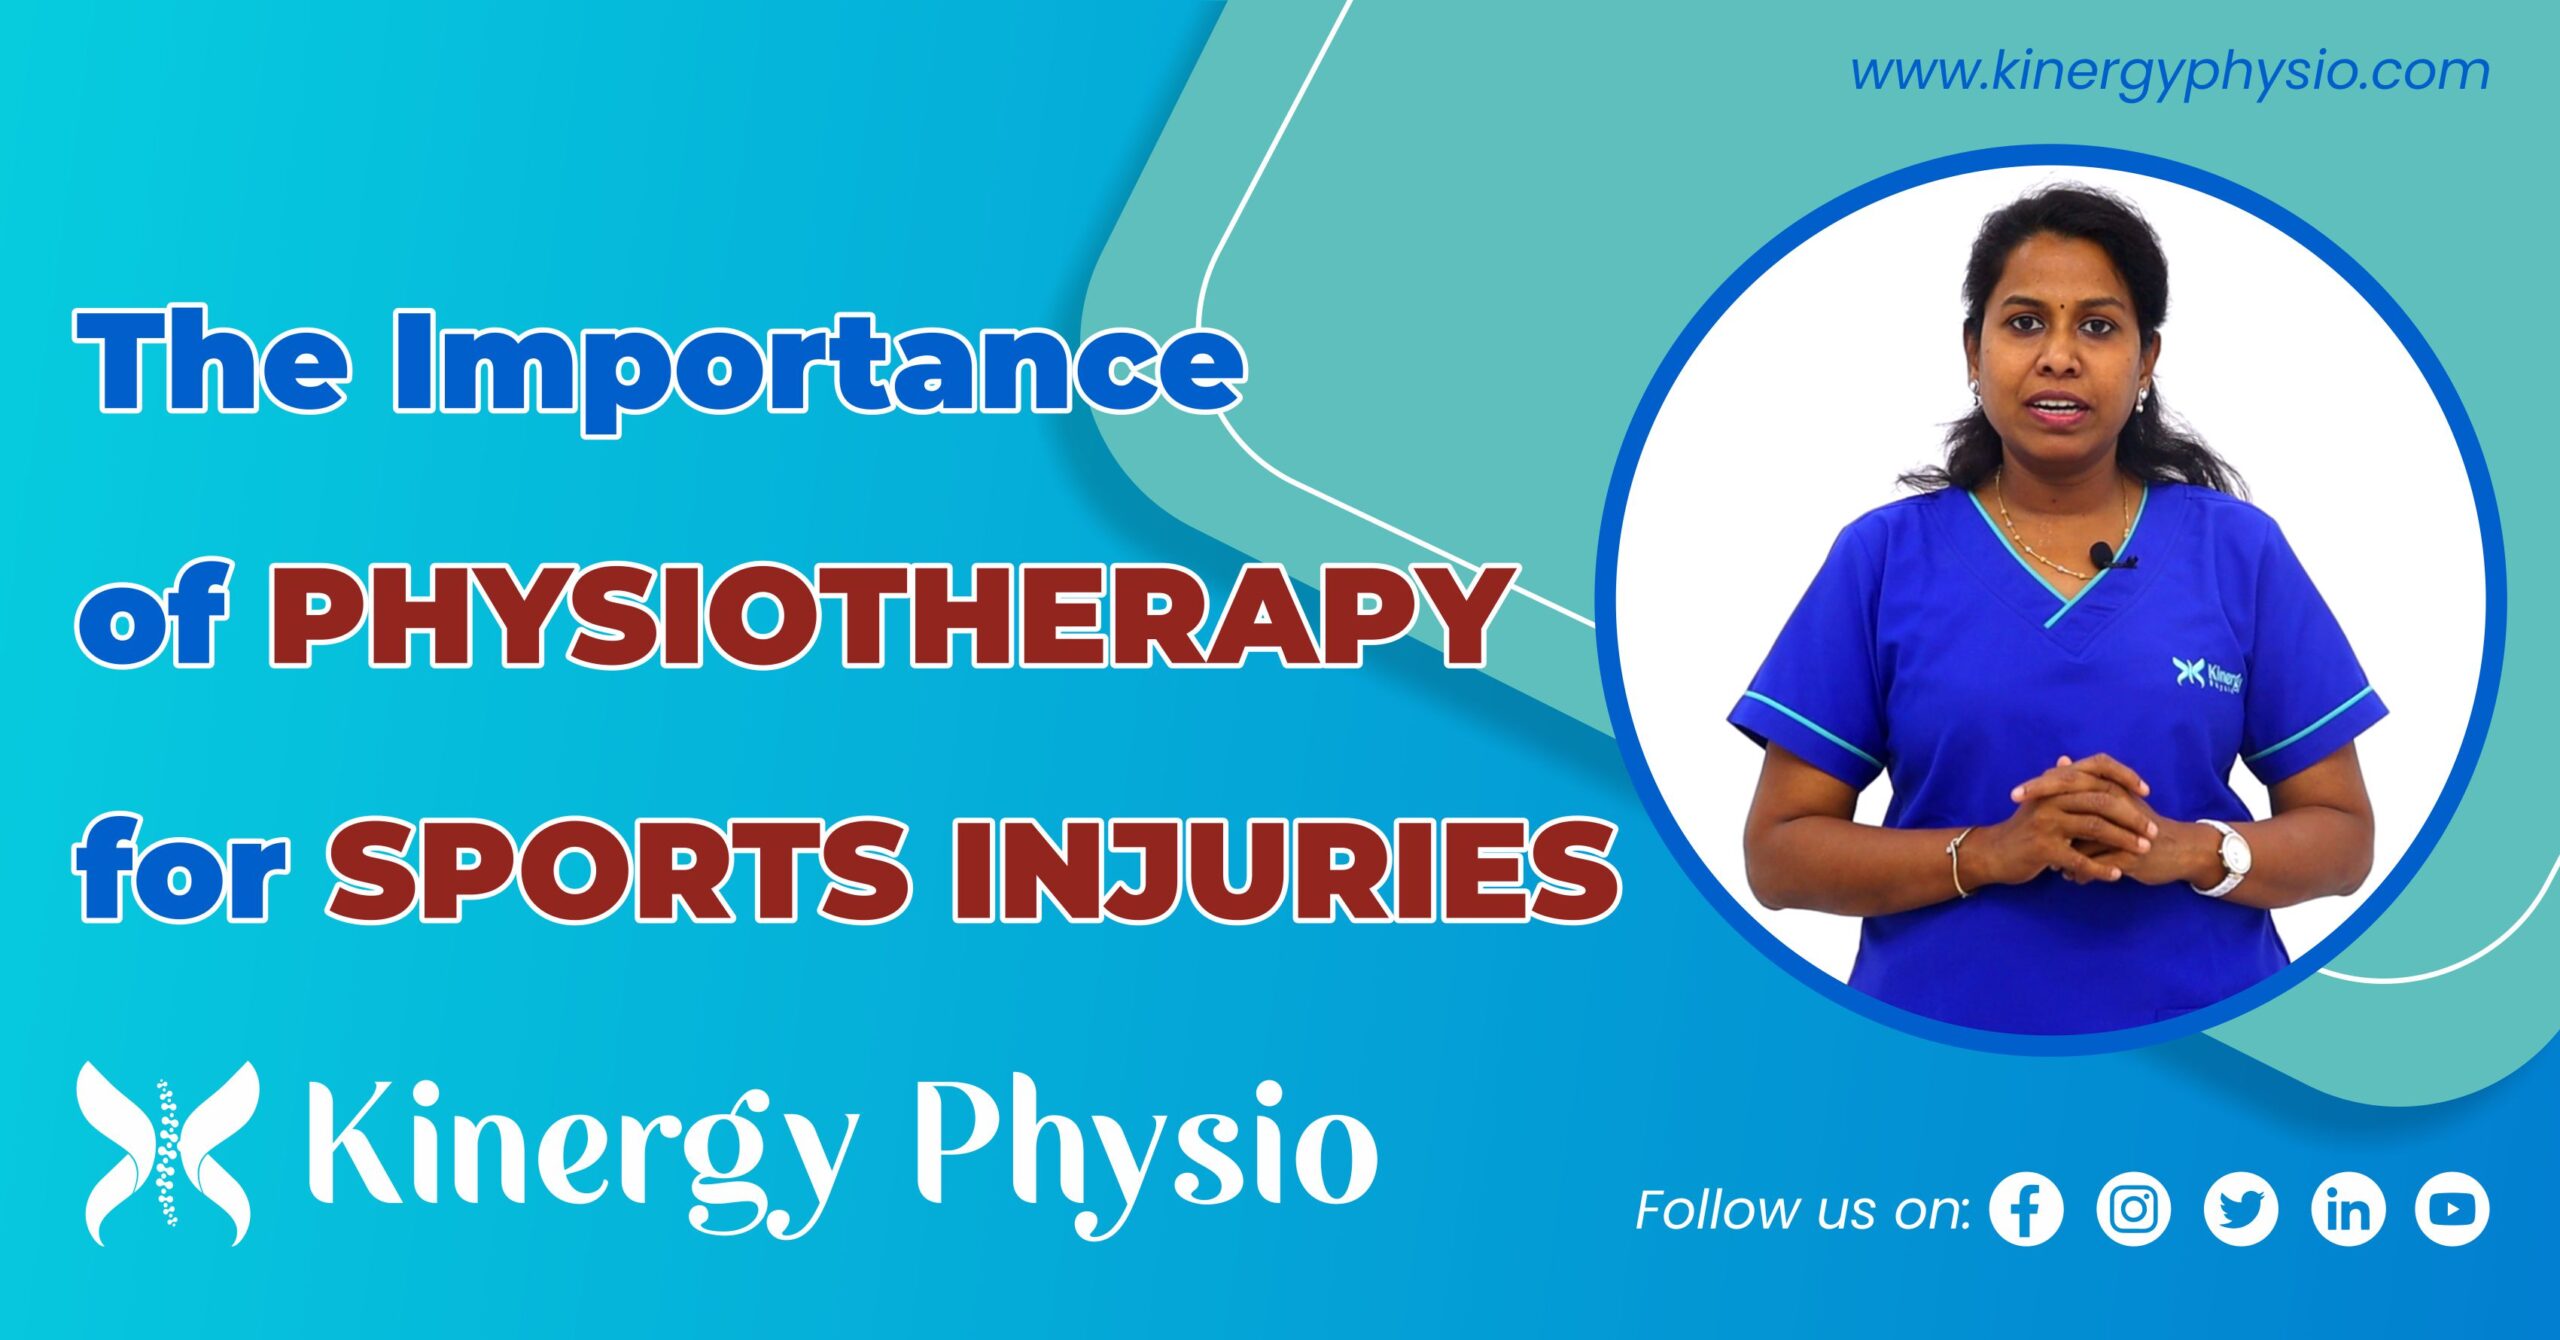 The Importance of Physiotherapy for Sports Injuries